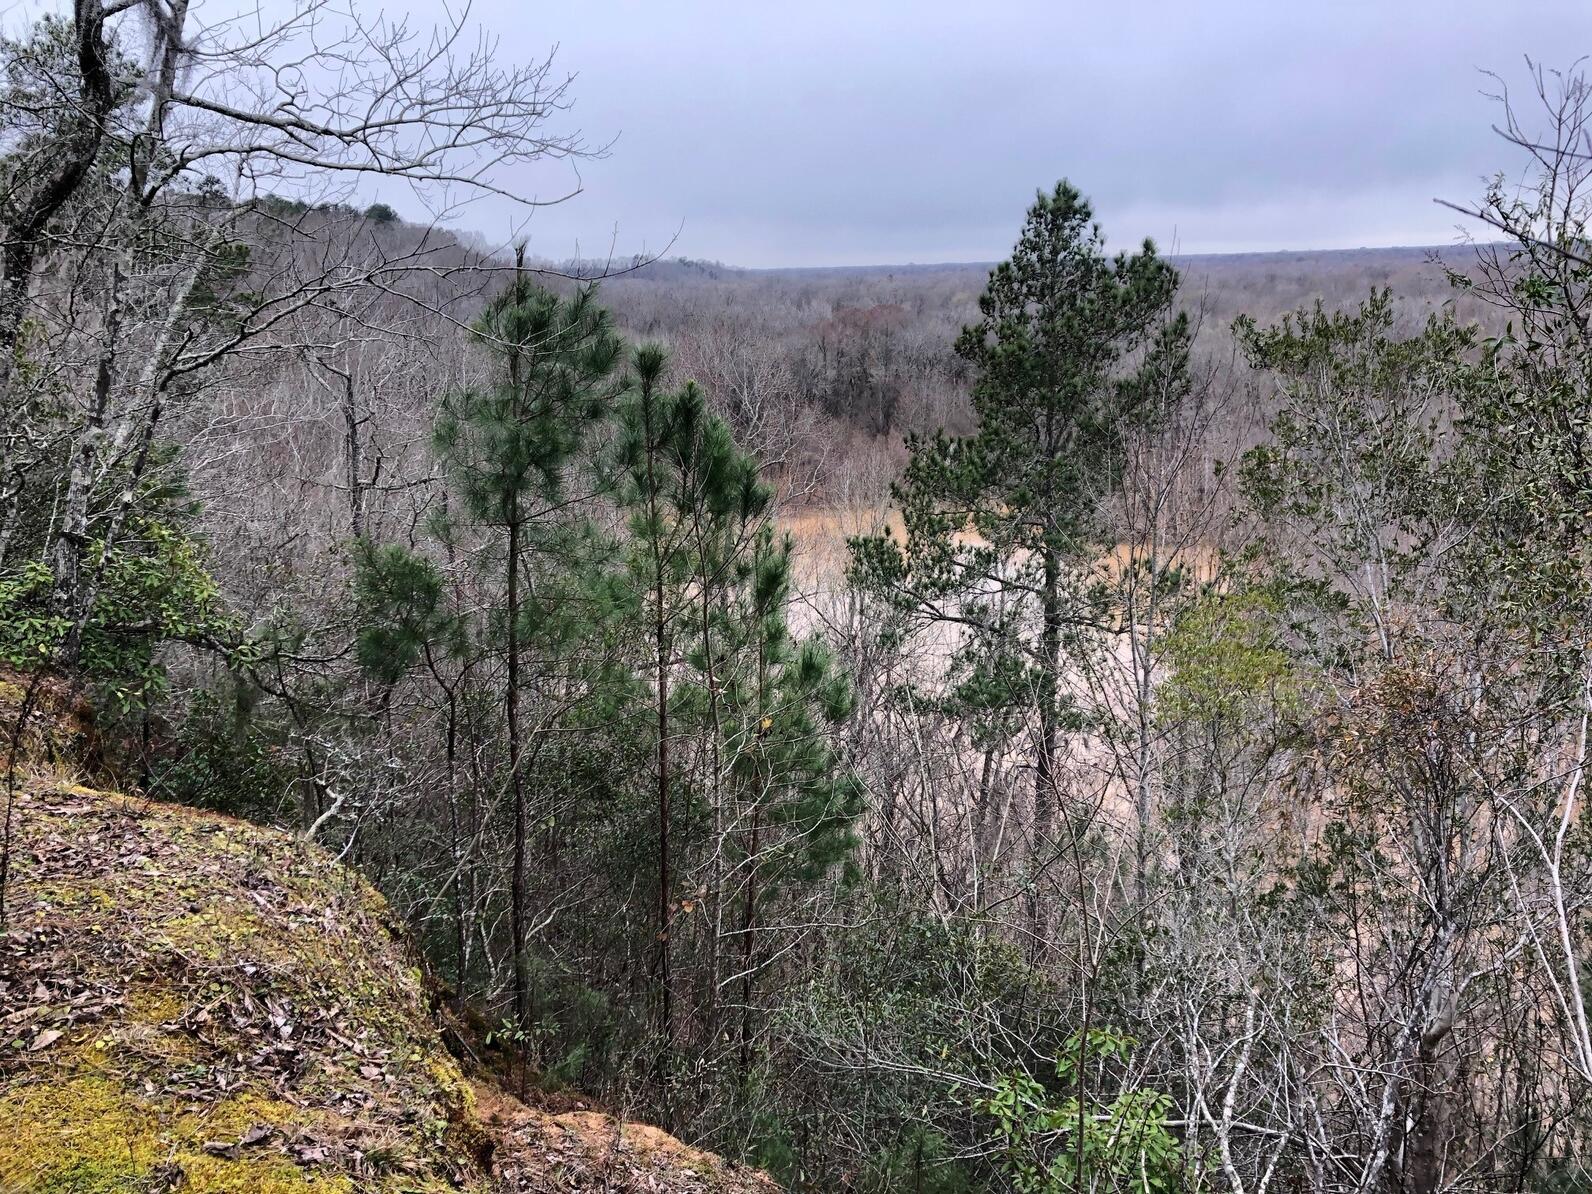 An expansive view from a river bluff looks over the Congaree National Forest on a cool winter day with grey skies and bare trees. 